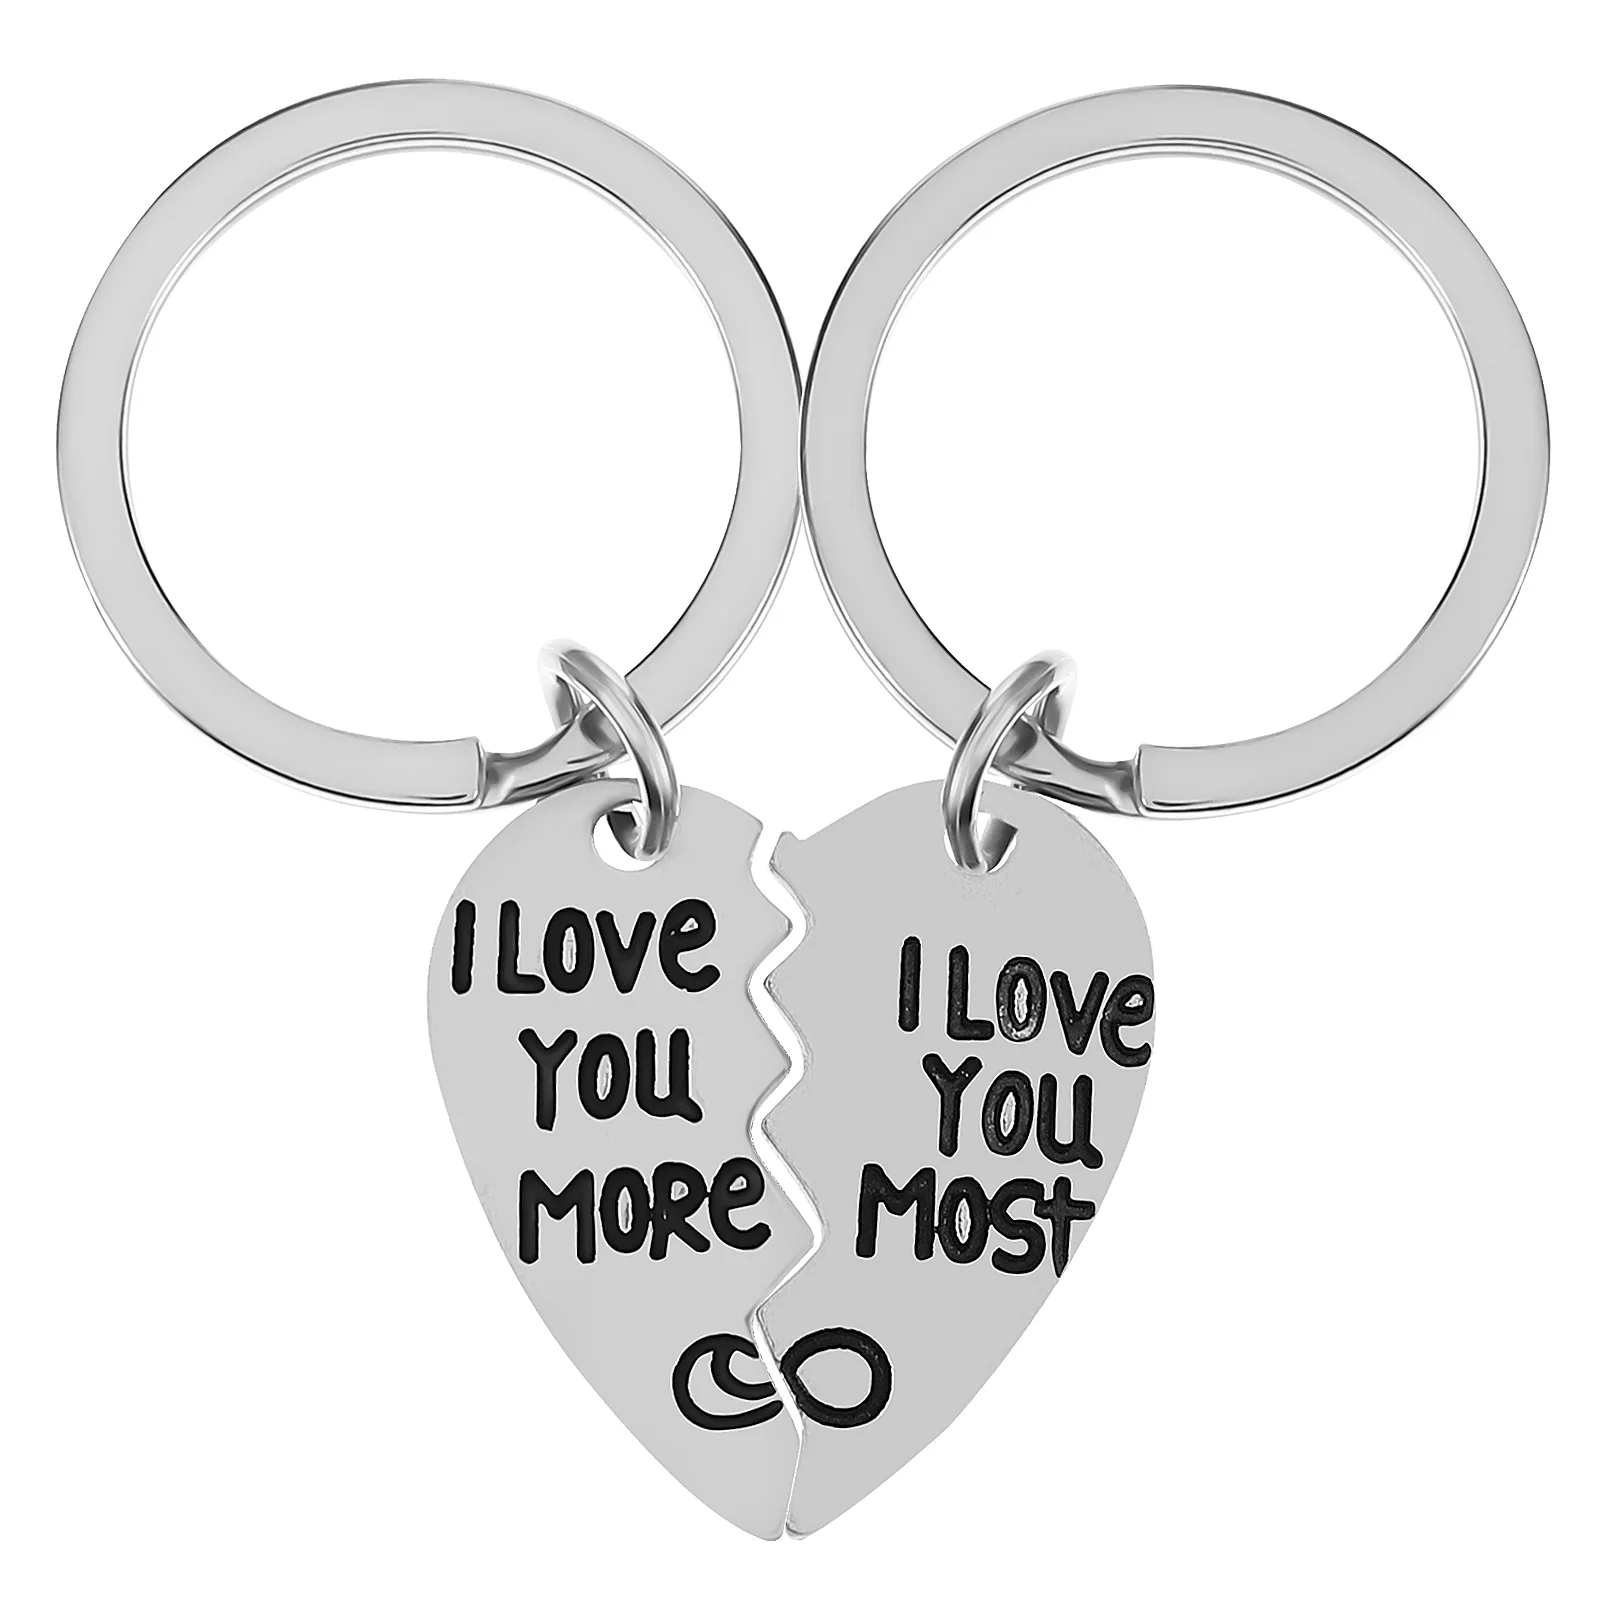 

1 Pair Heart-shaped Puzzle Key Chains I Love You Most/More Couple Keychains for Valentine's Day Birthday Gifts